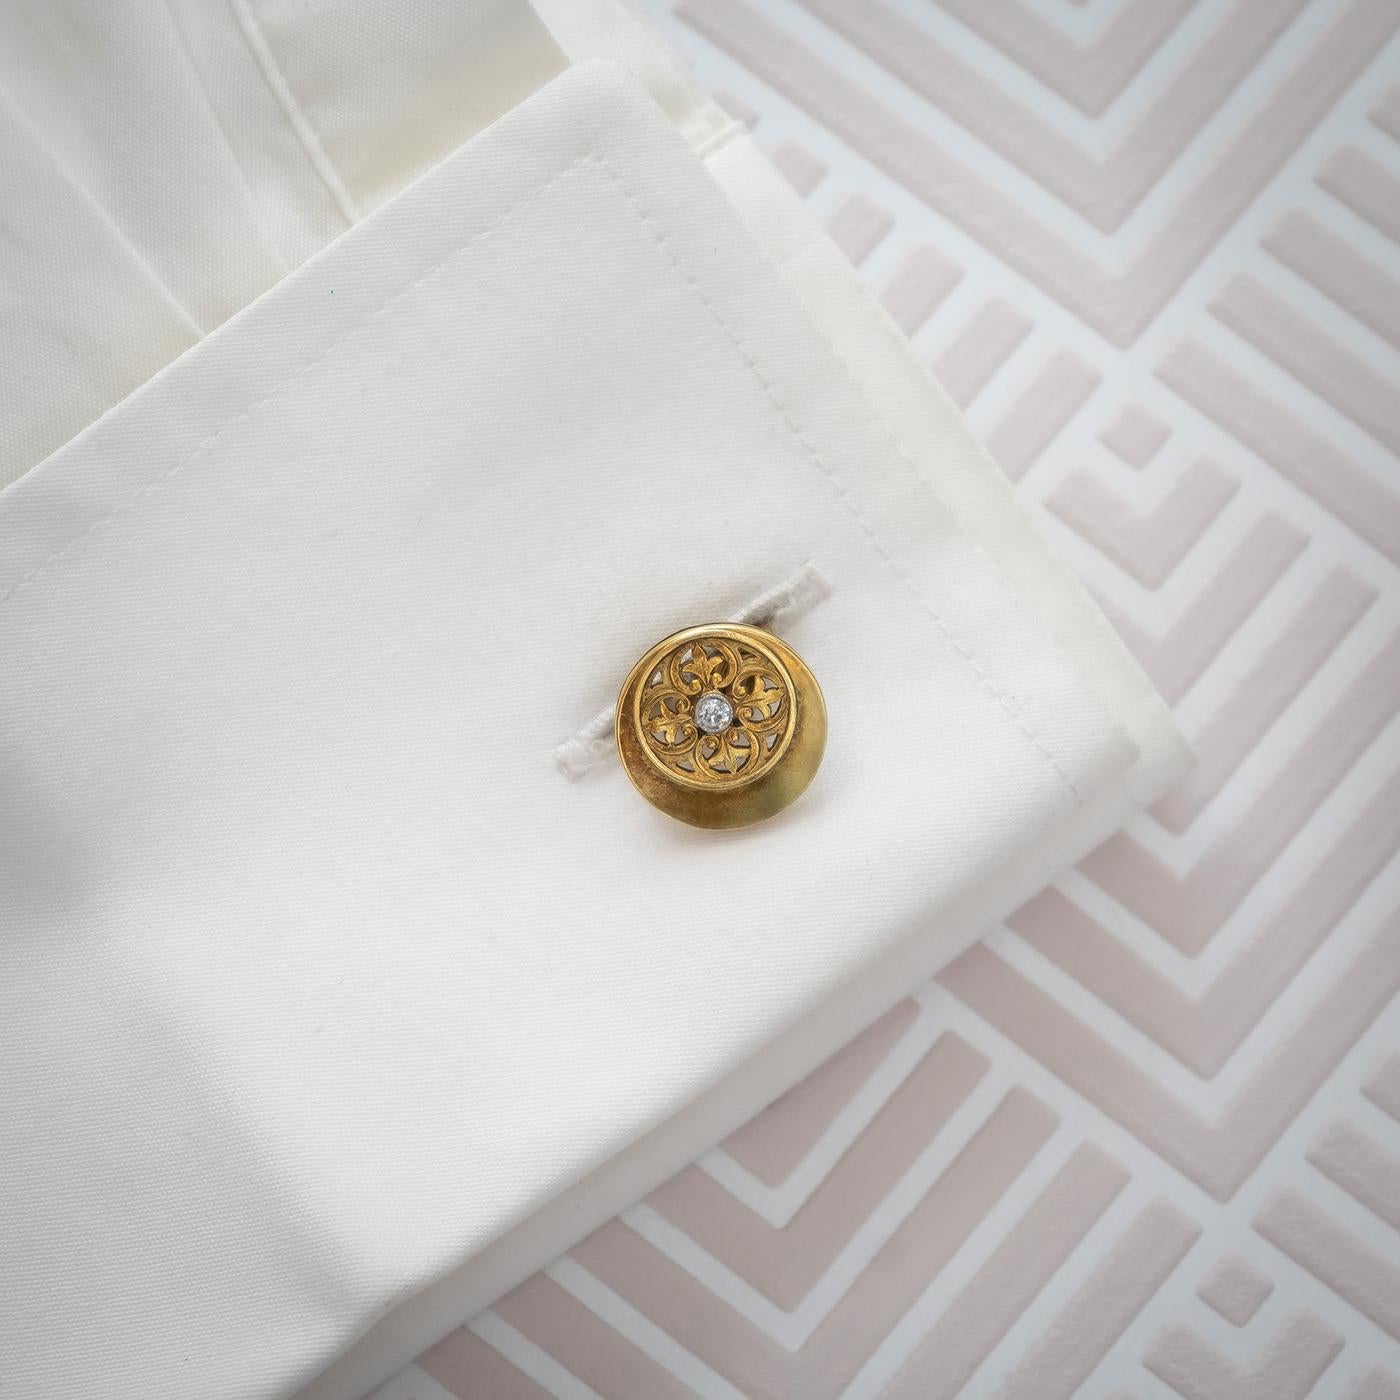 A pair of Victorian, Aesthetic Movement or Gothic Revival, gold and diamond cufflinks, with a motif, in the style of Pugin, within a crescent.